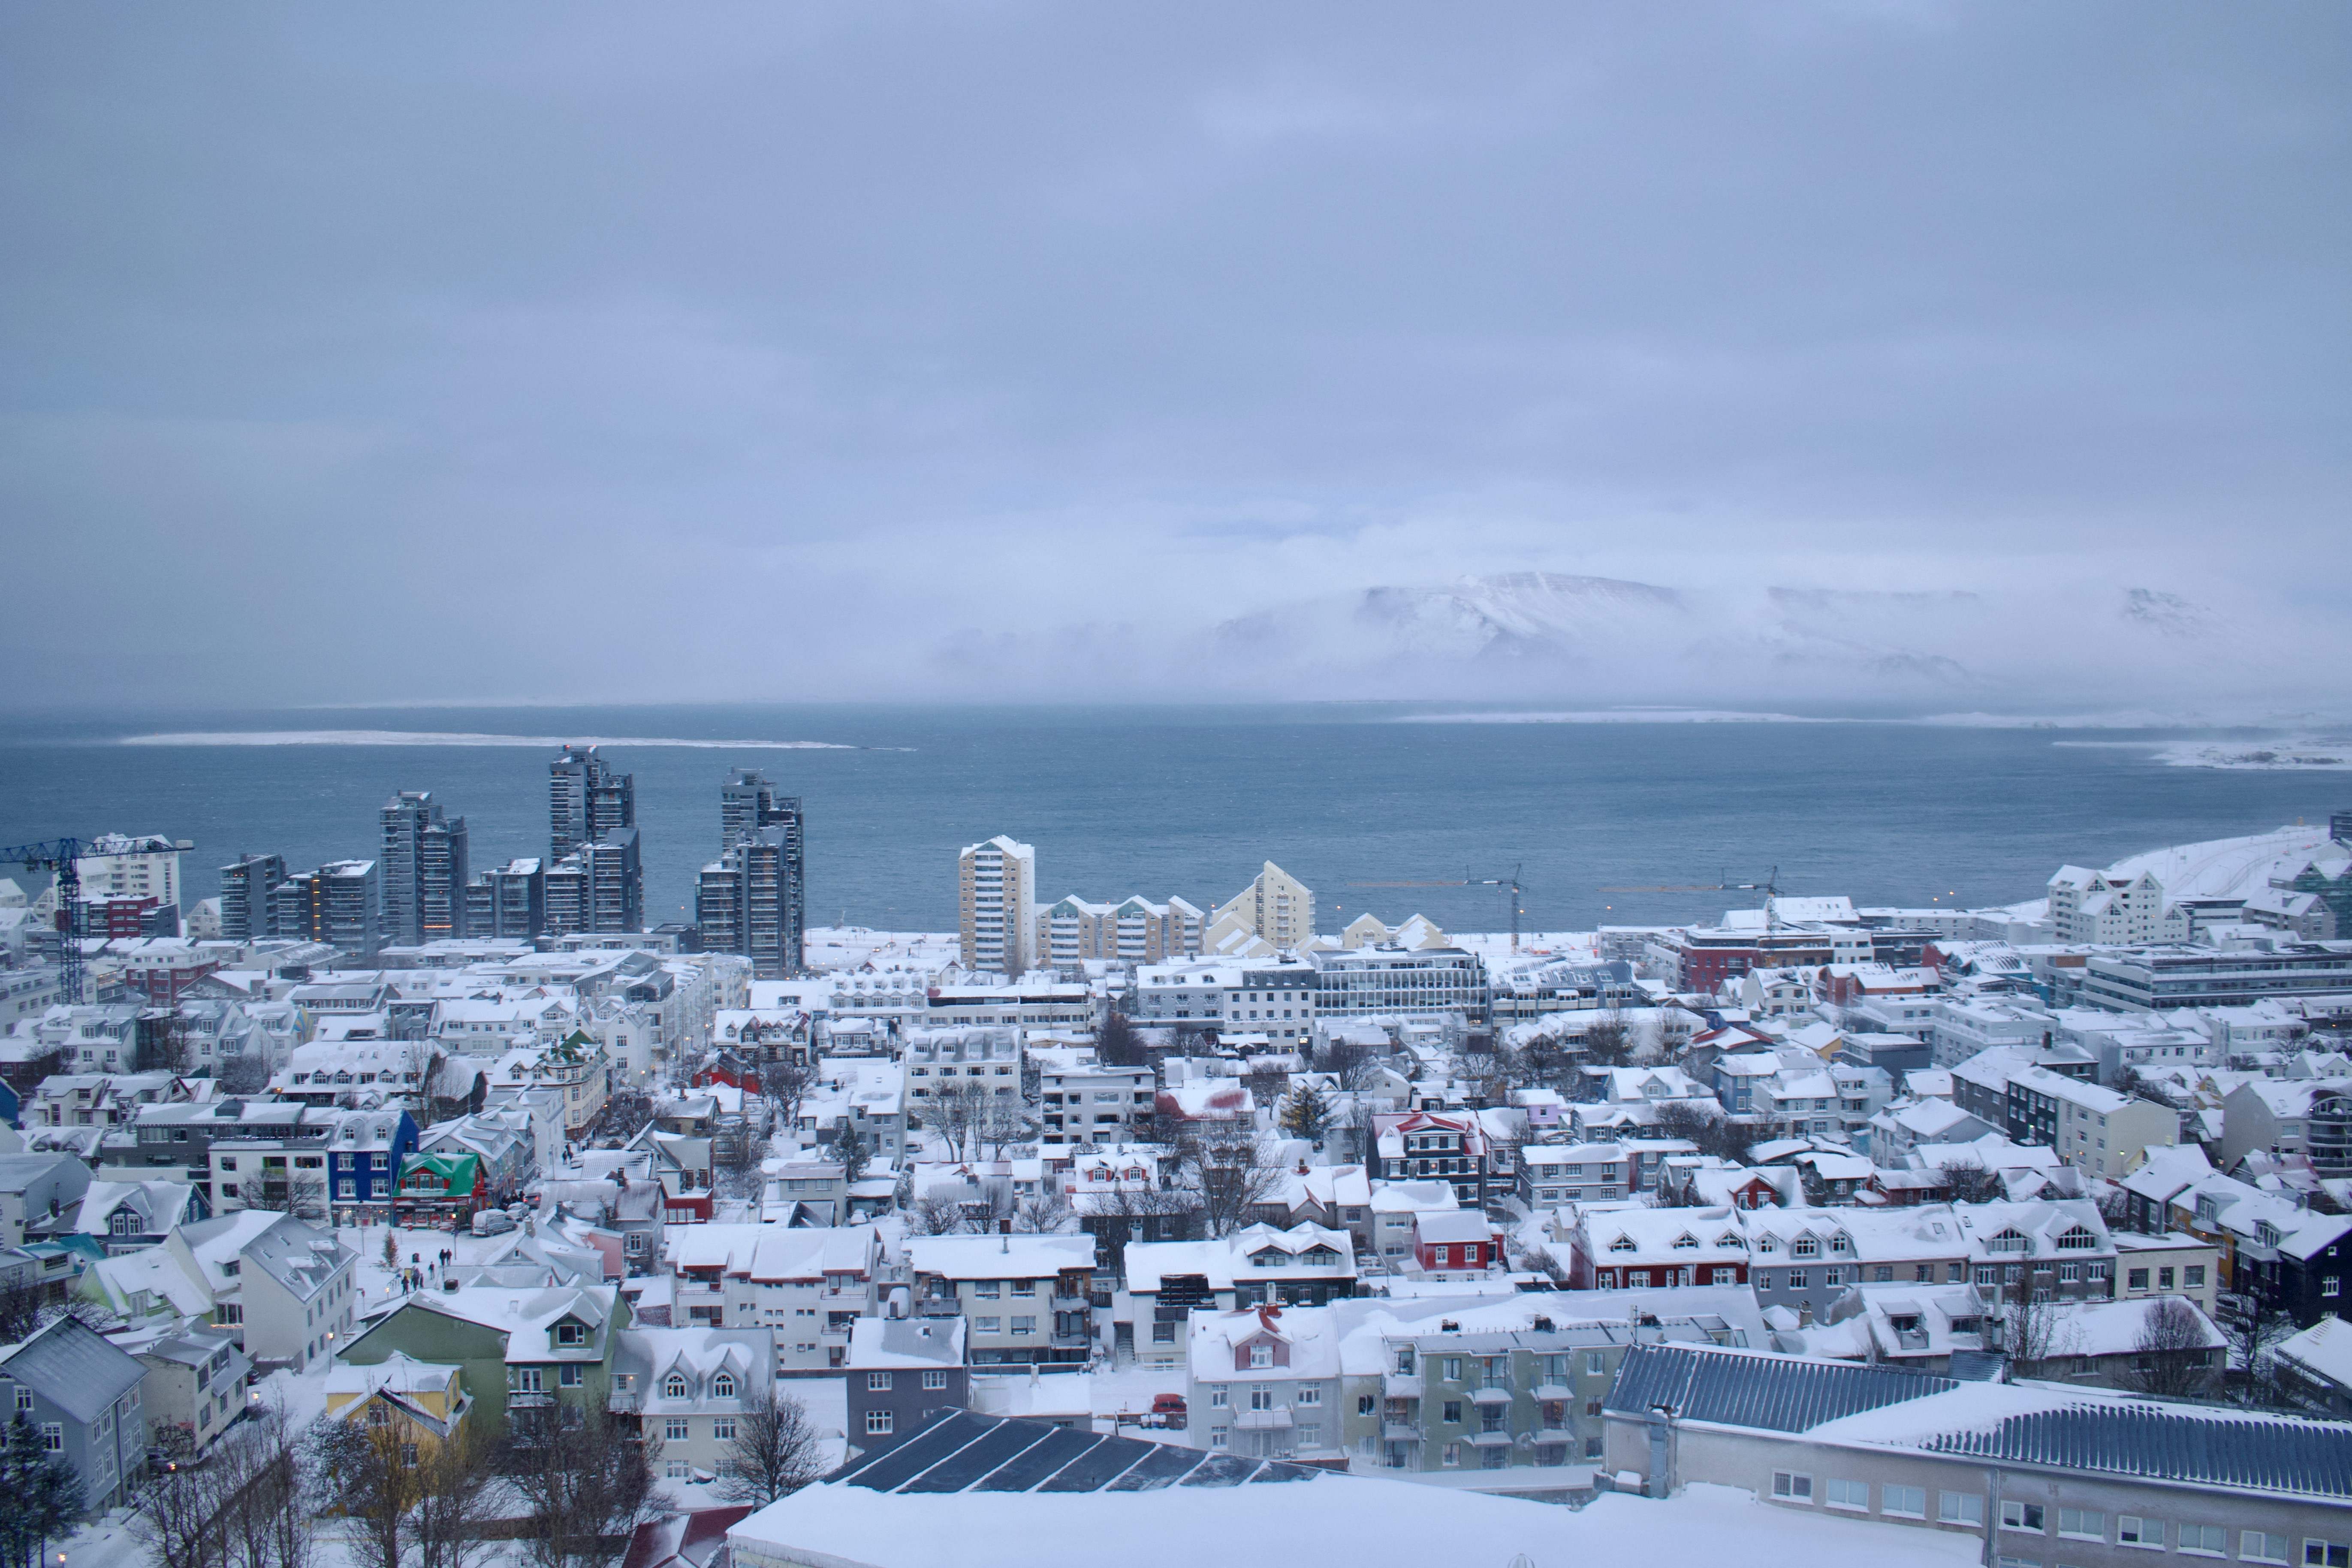 Calm before the storm: Reykjavik just before heavy snow arrived